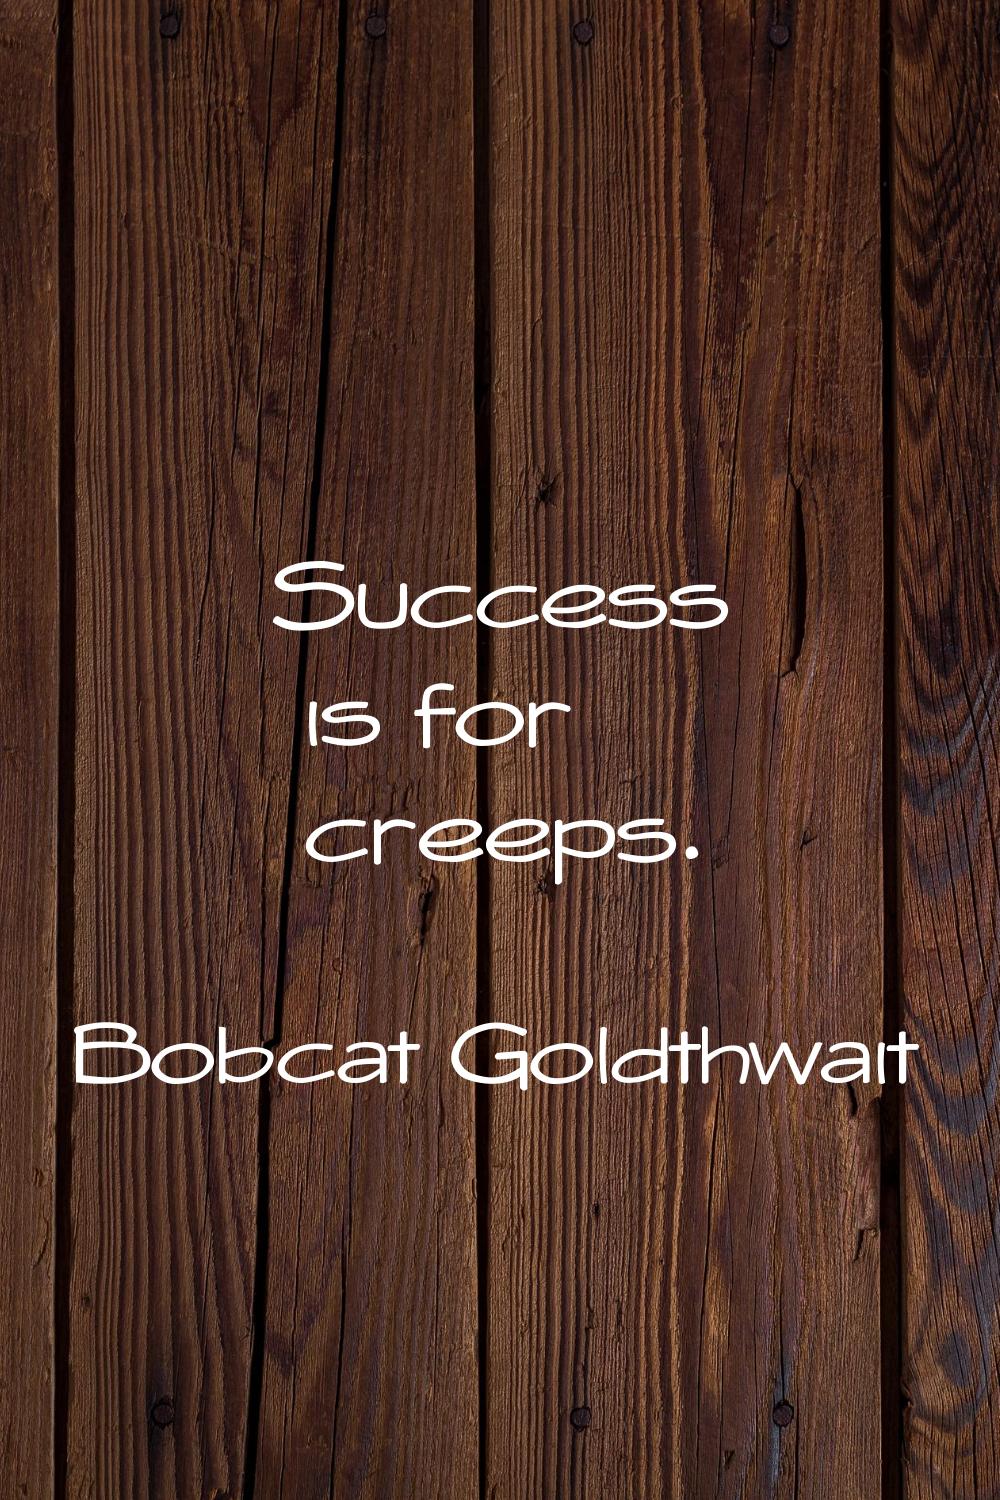 Success is for creeps.